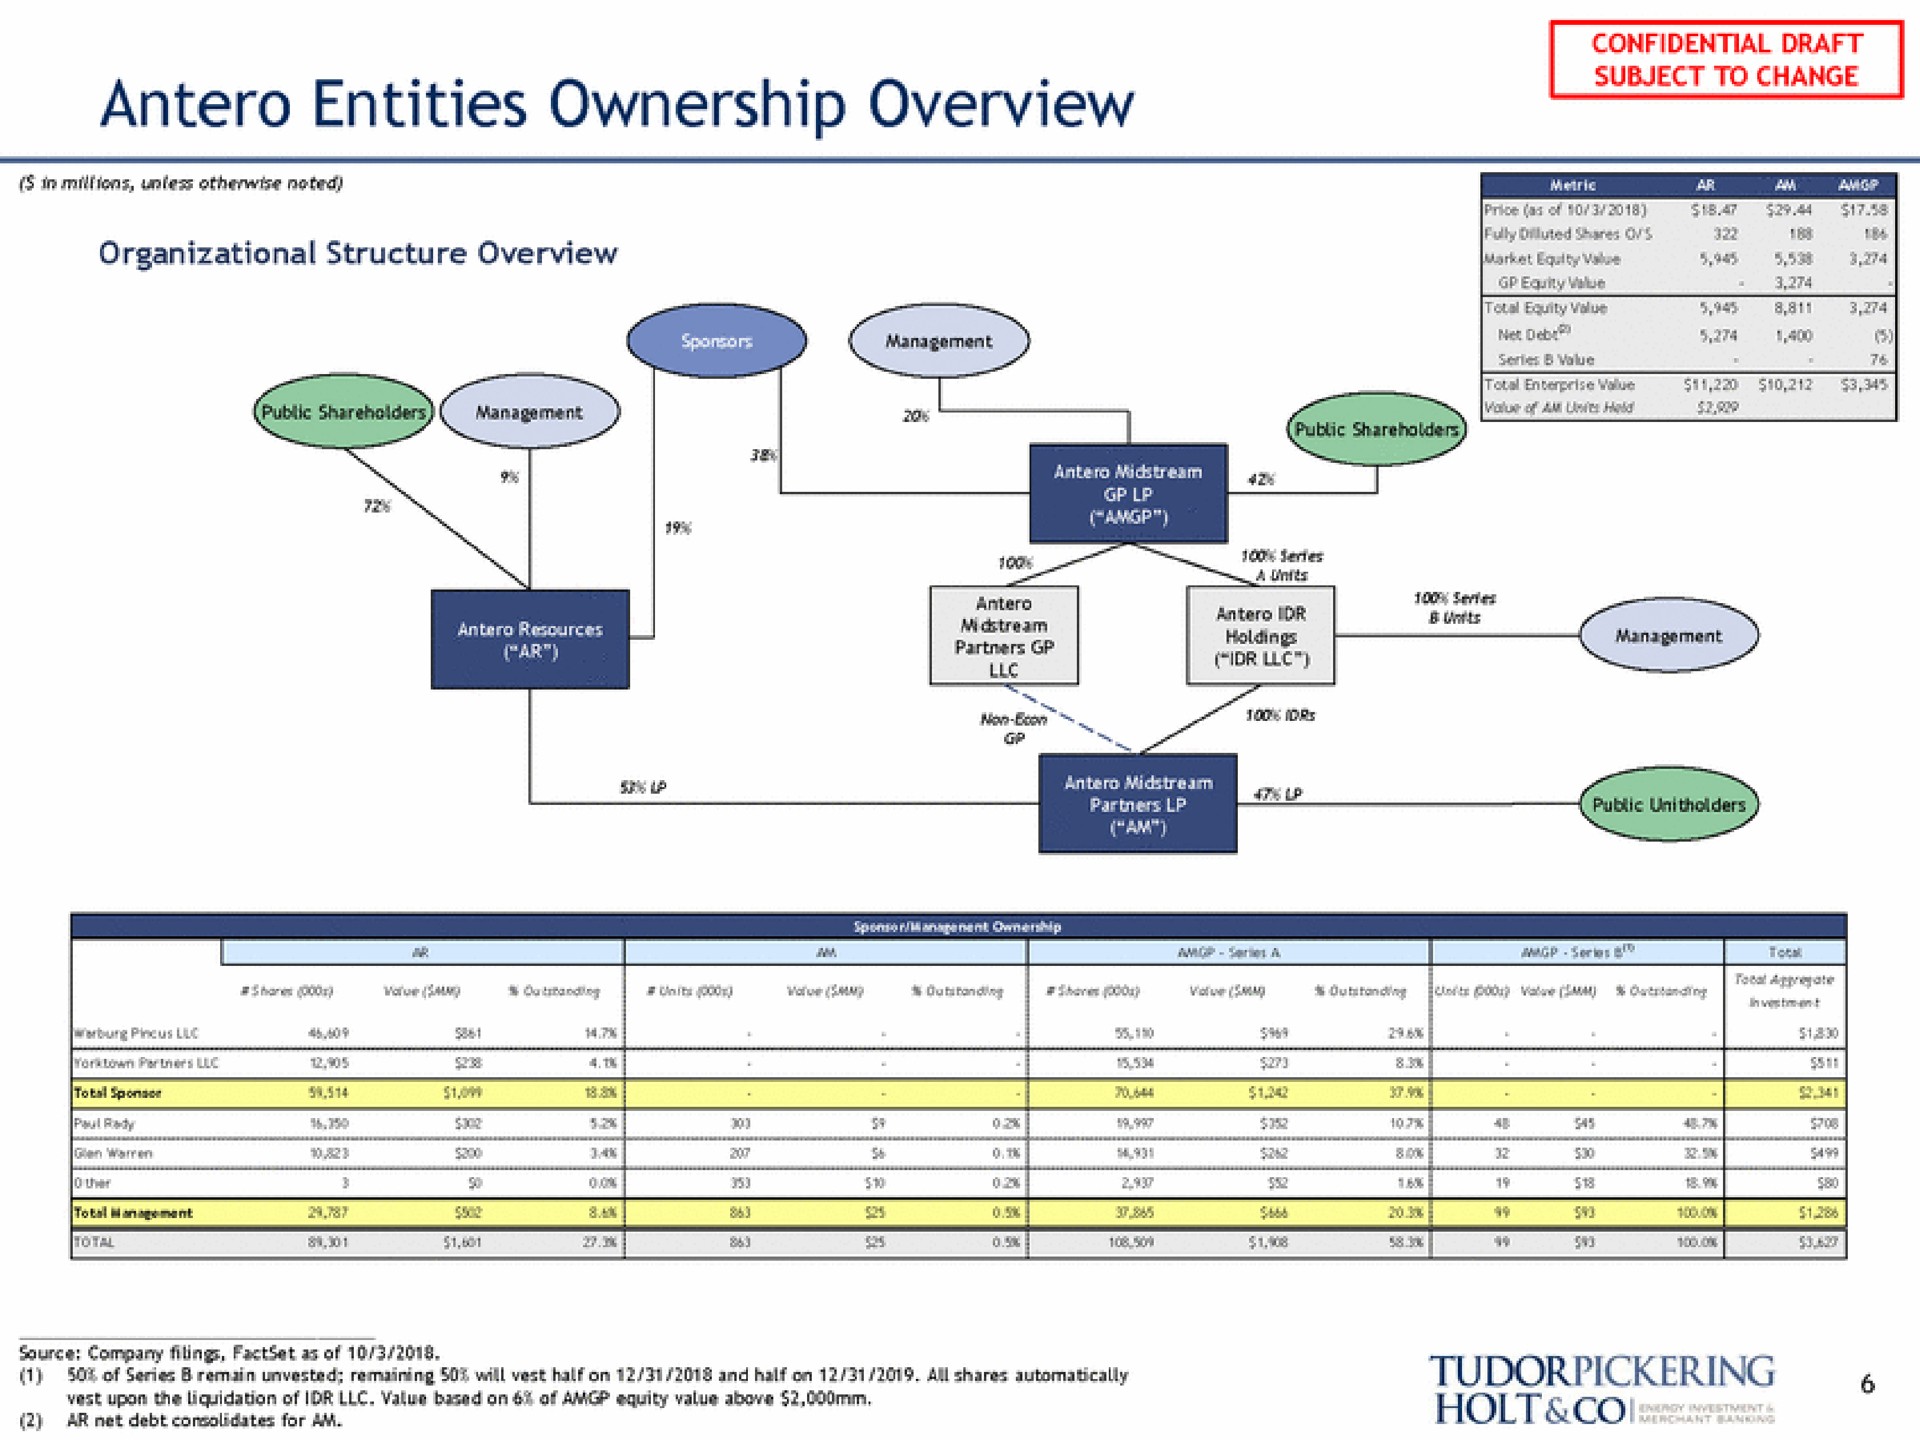 entities ownership overview a | Tudor, Pickering, Holt & Co